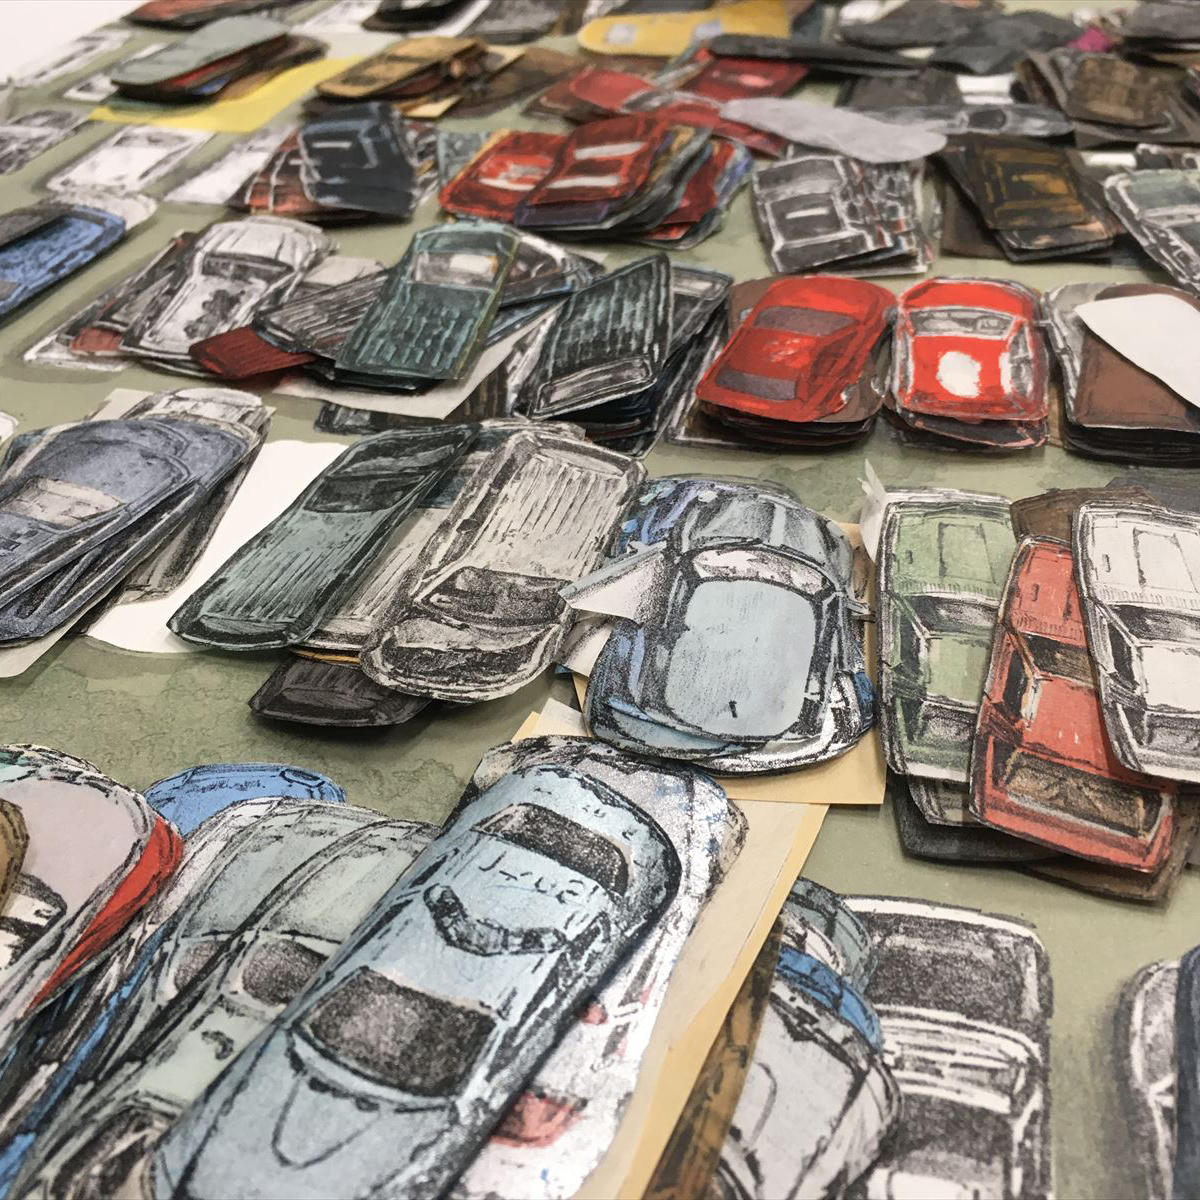 Hisaharu Motoda：CARS -availble works, new works and production scenes for upcoming exhibition